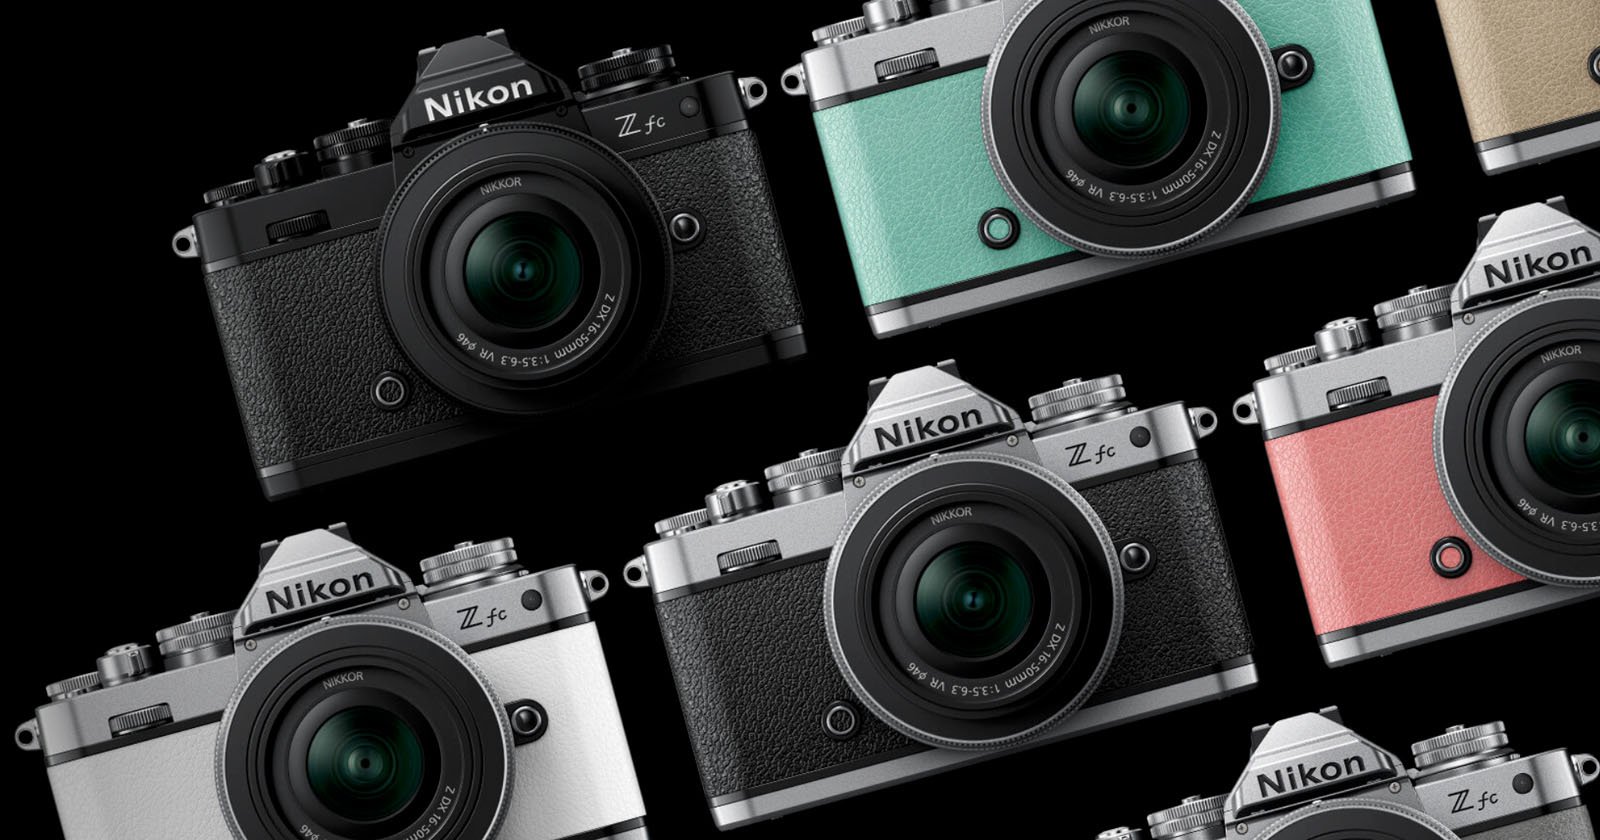 You Can Try the Nikon Zfc for 30 Days